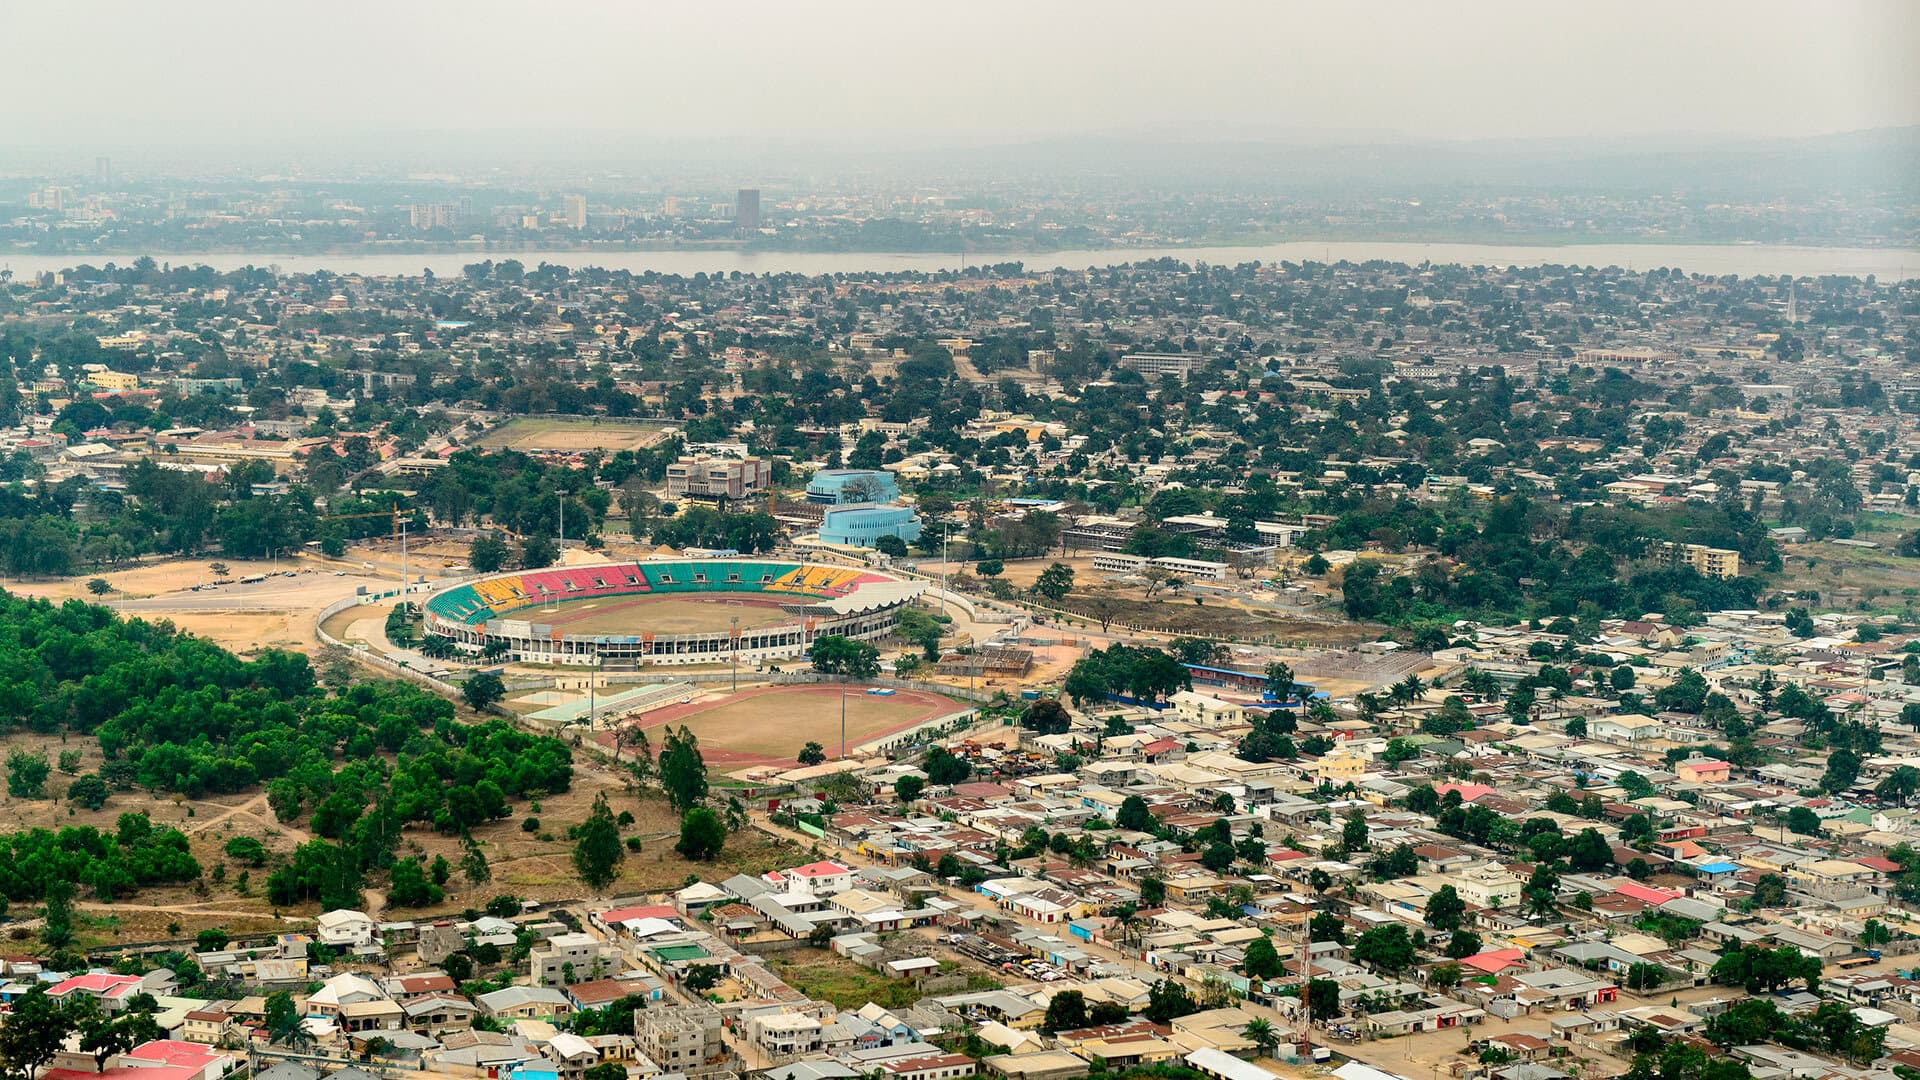 Aerial view of Brazzaville with the Congo River and Kinshasa, Capital of Democratic Republic of the Congo in the background